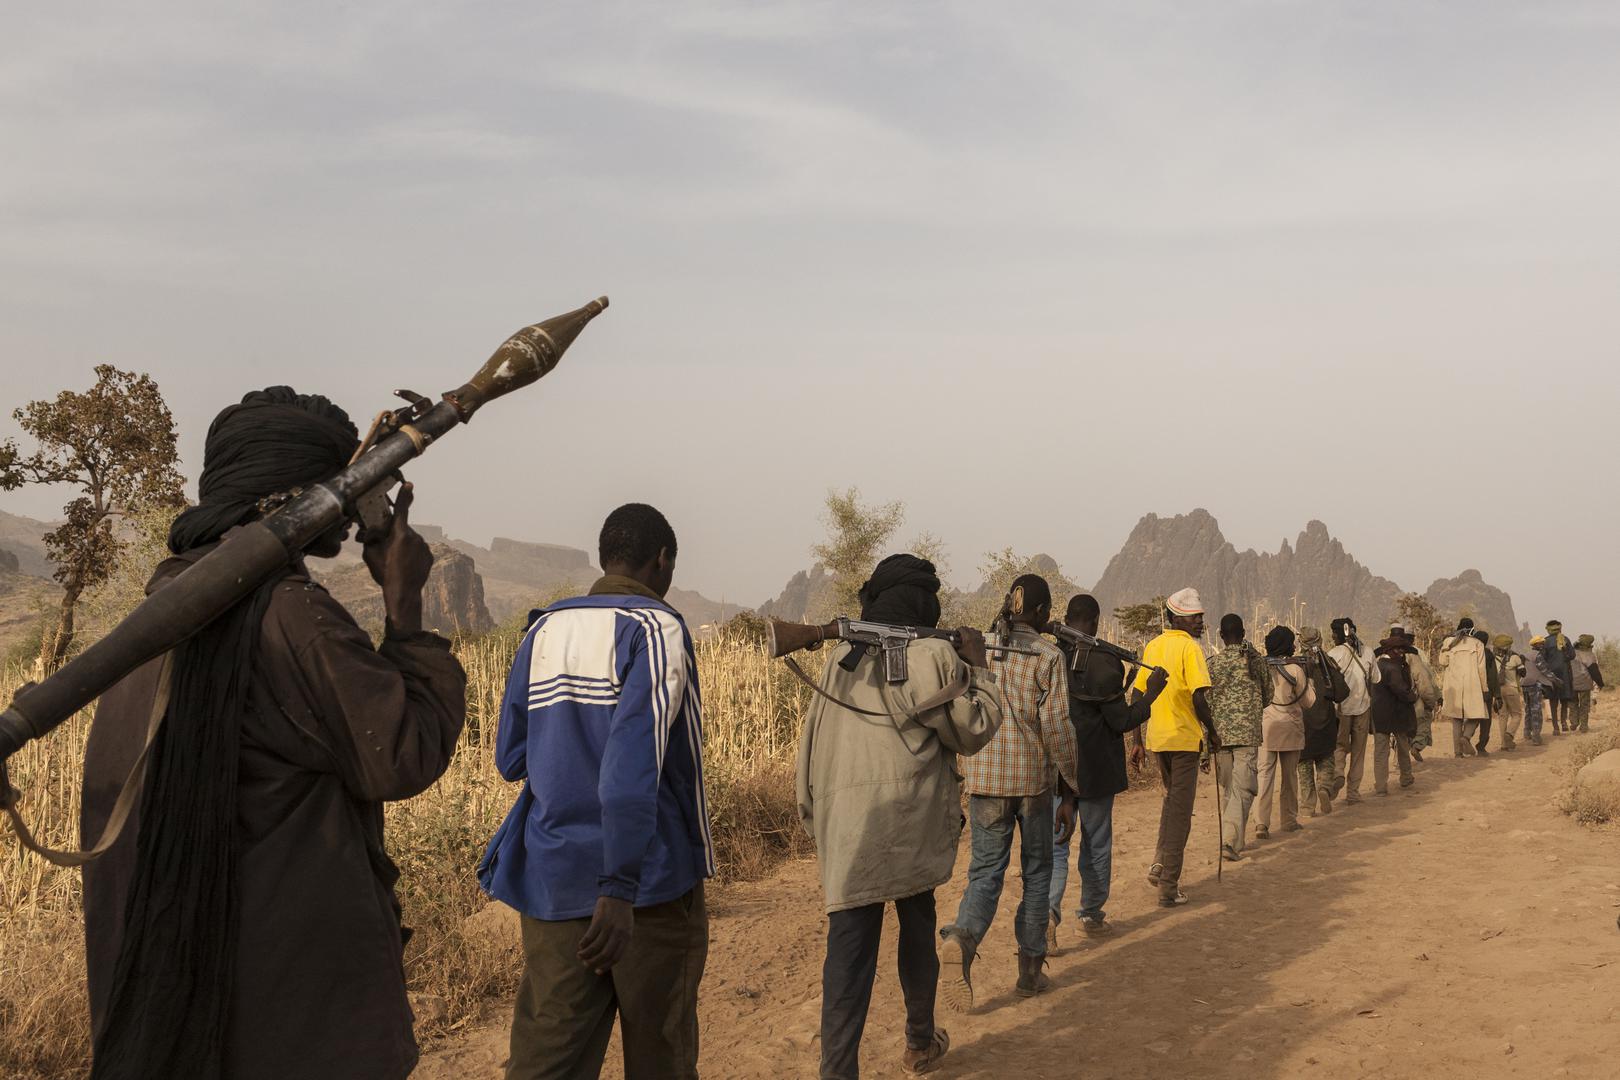 Fighters from the rebel Sudan Liberation Army-Abdul Wahid faction